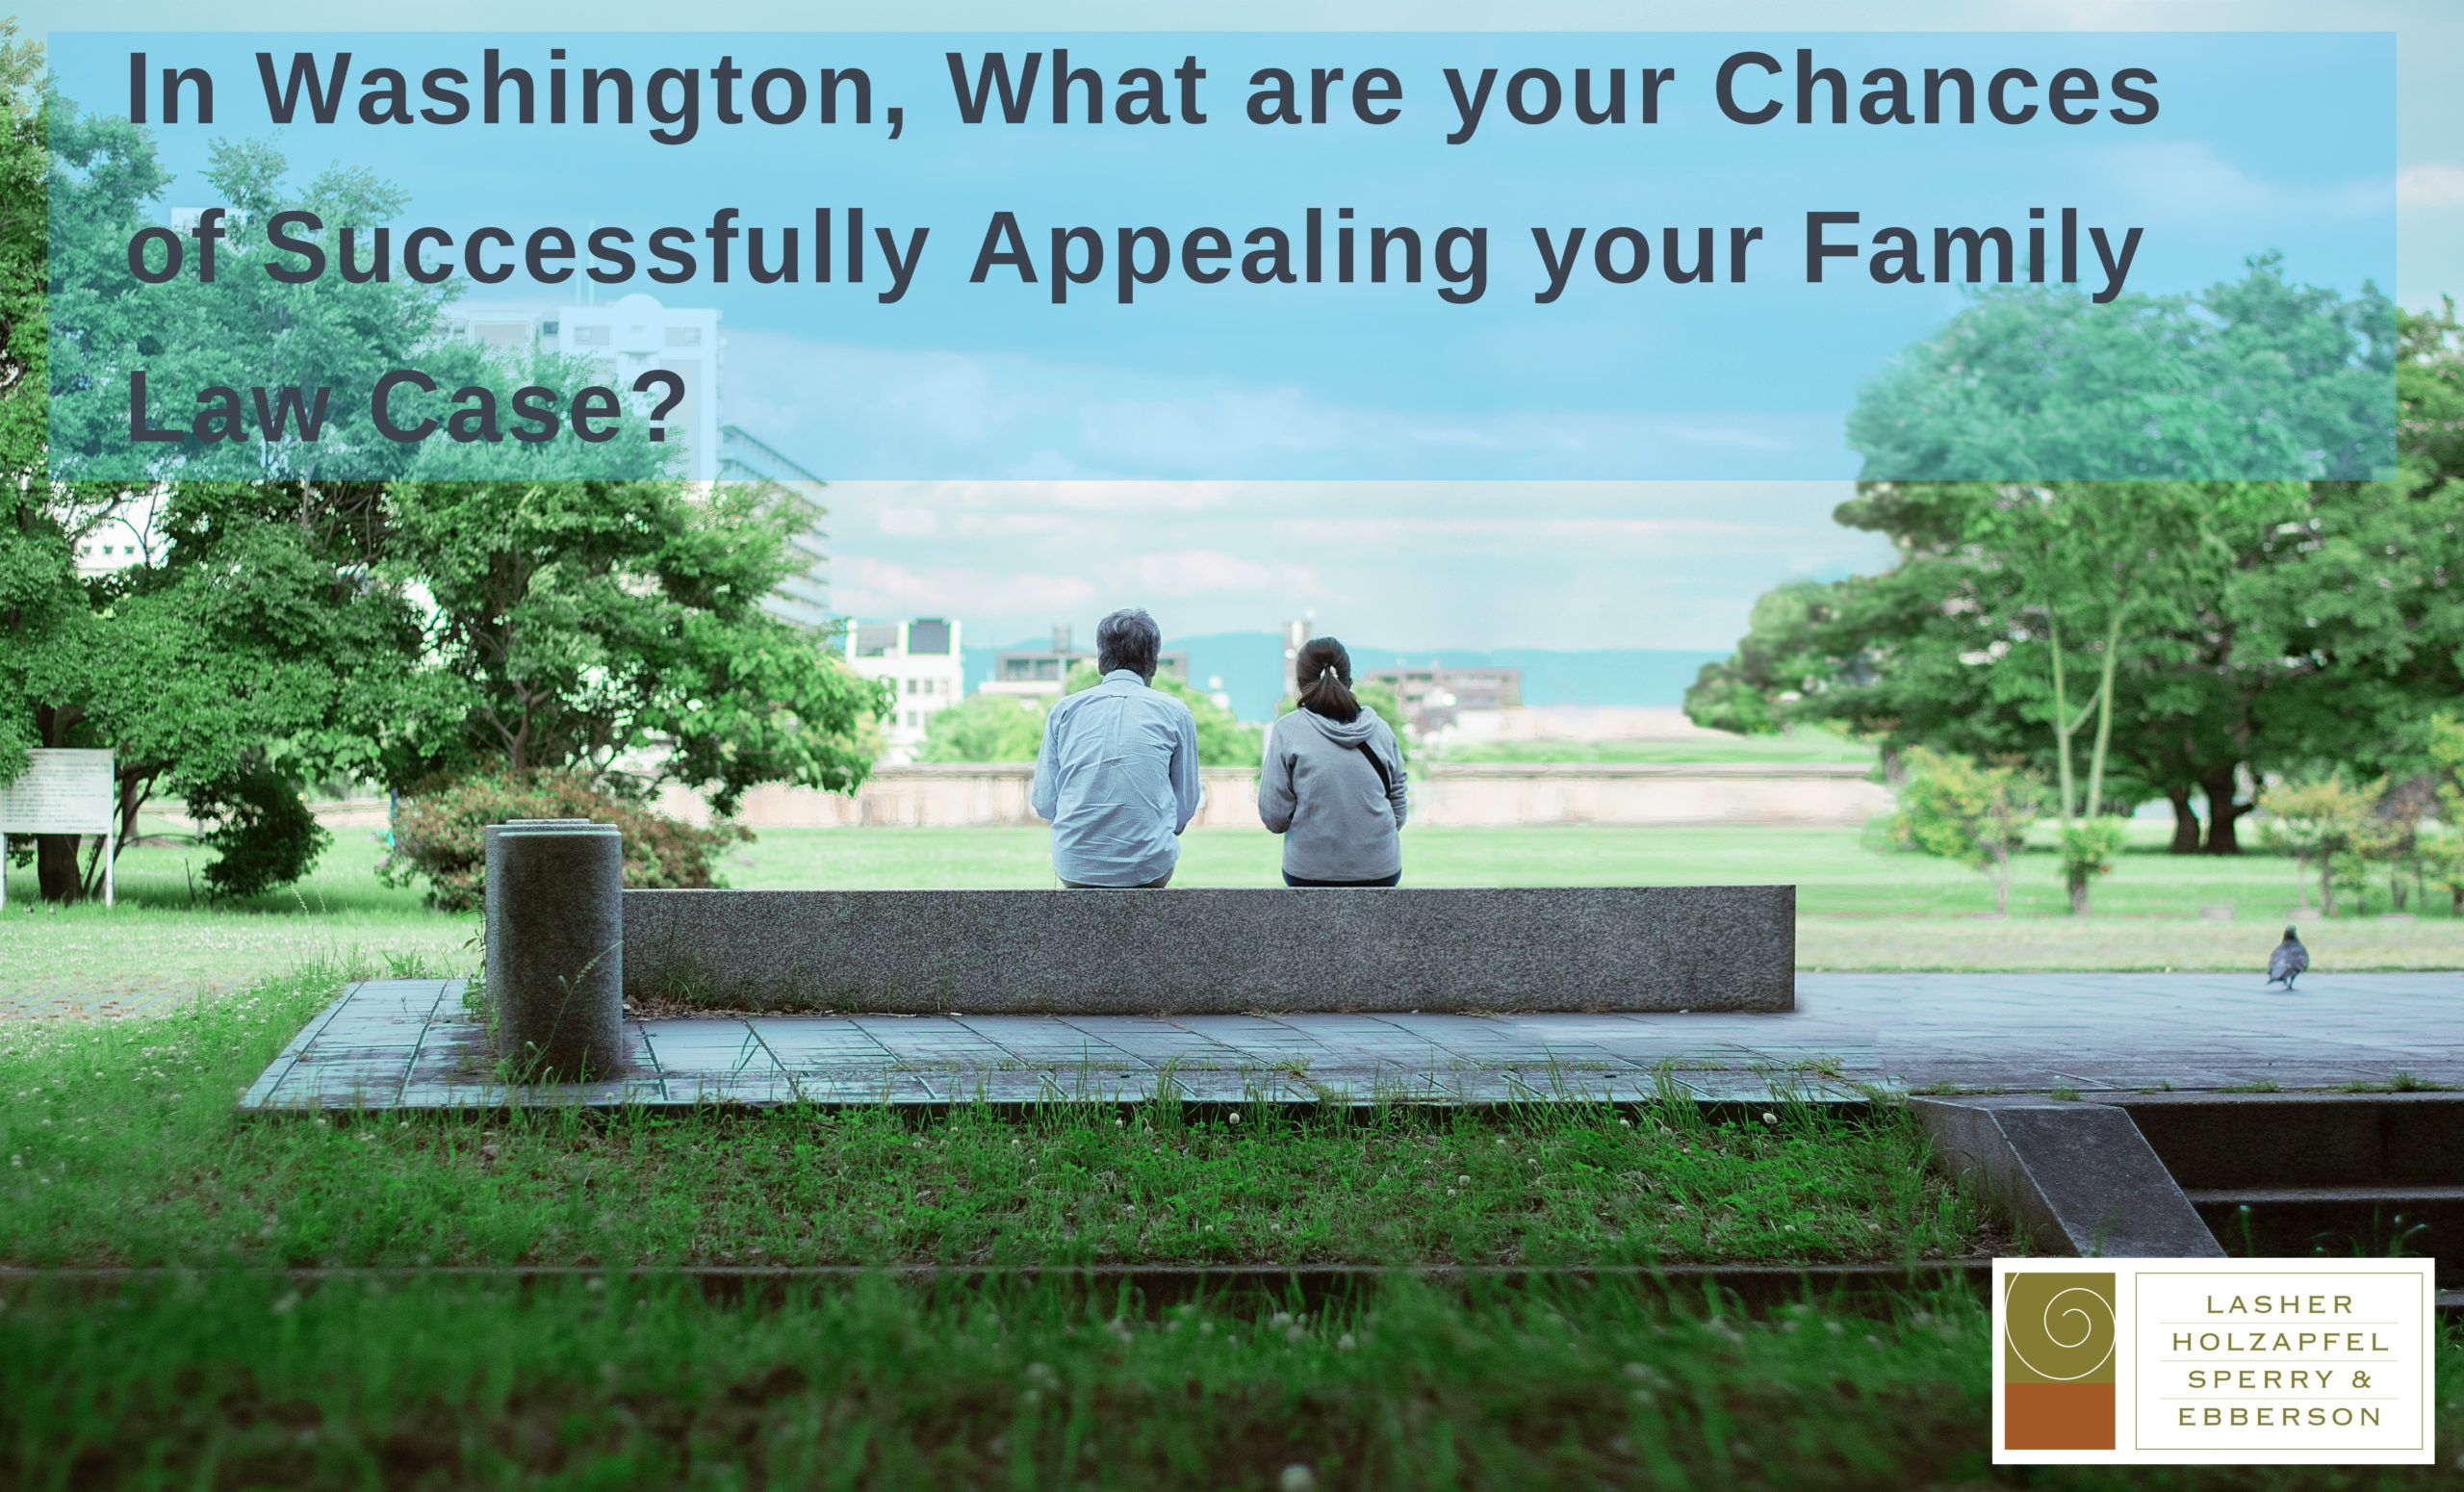 In Washington, What are your Chances of Successfully Appealing your Family Law Case?